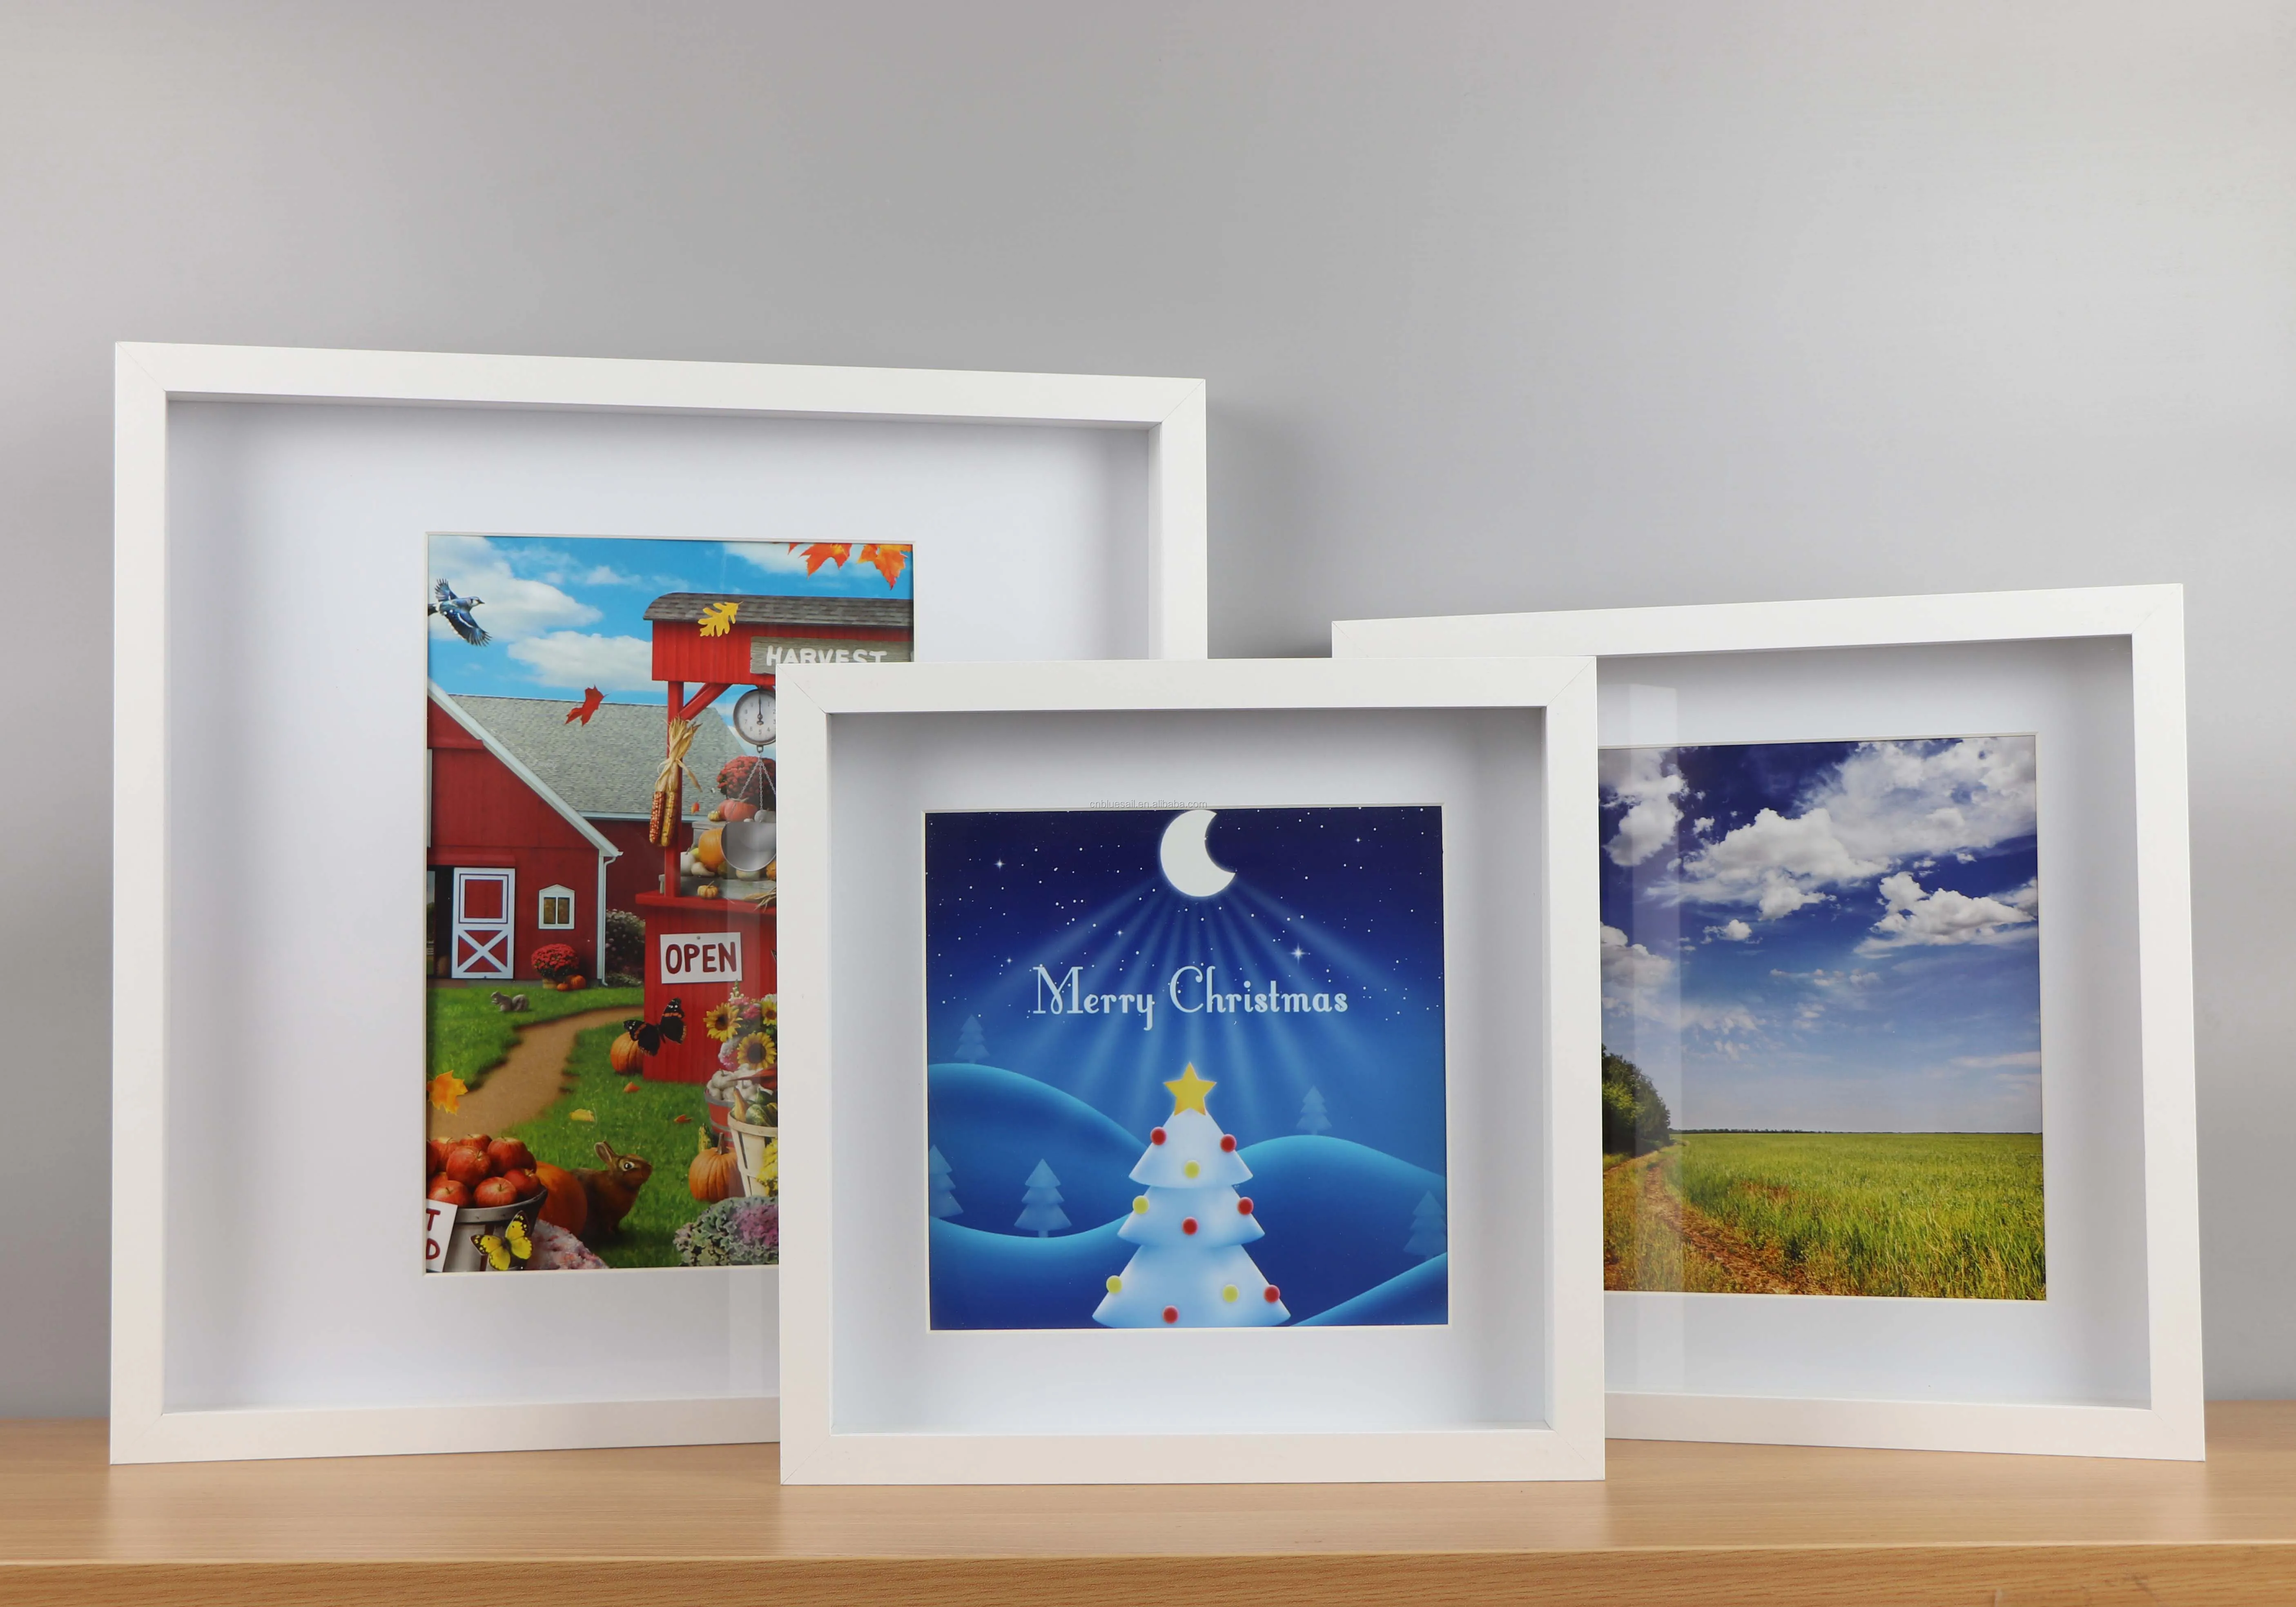 Details about   3D Deep Box Frame Range Picture Photo Frame Display Various Sizes 12x12 A4 